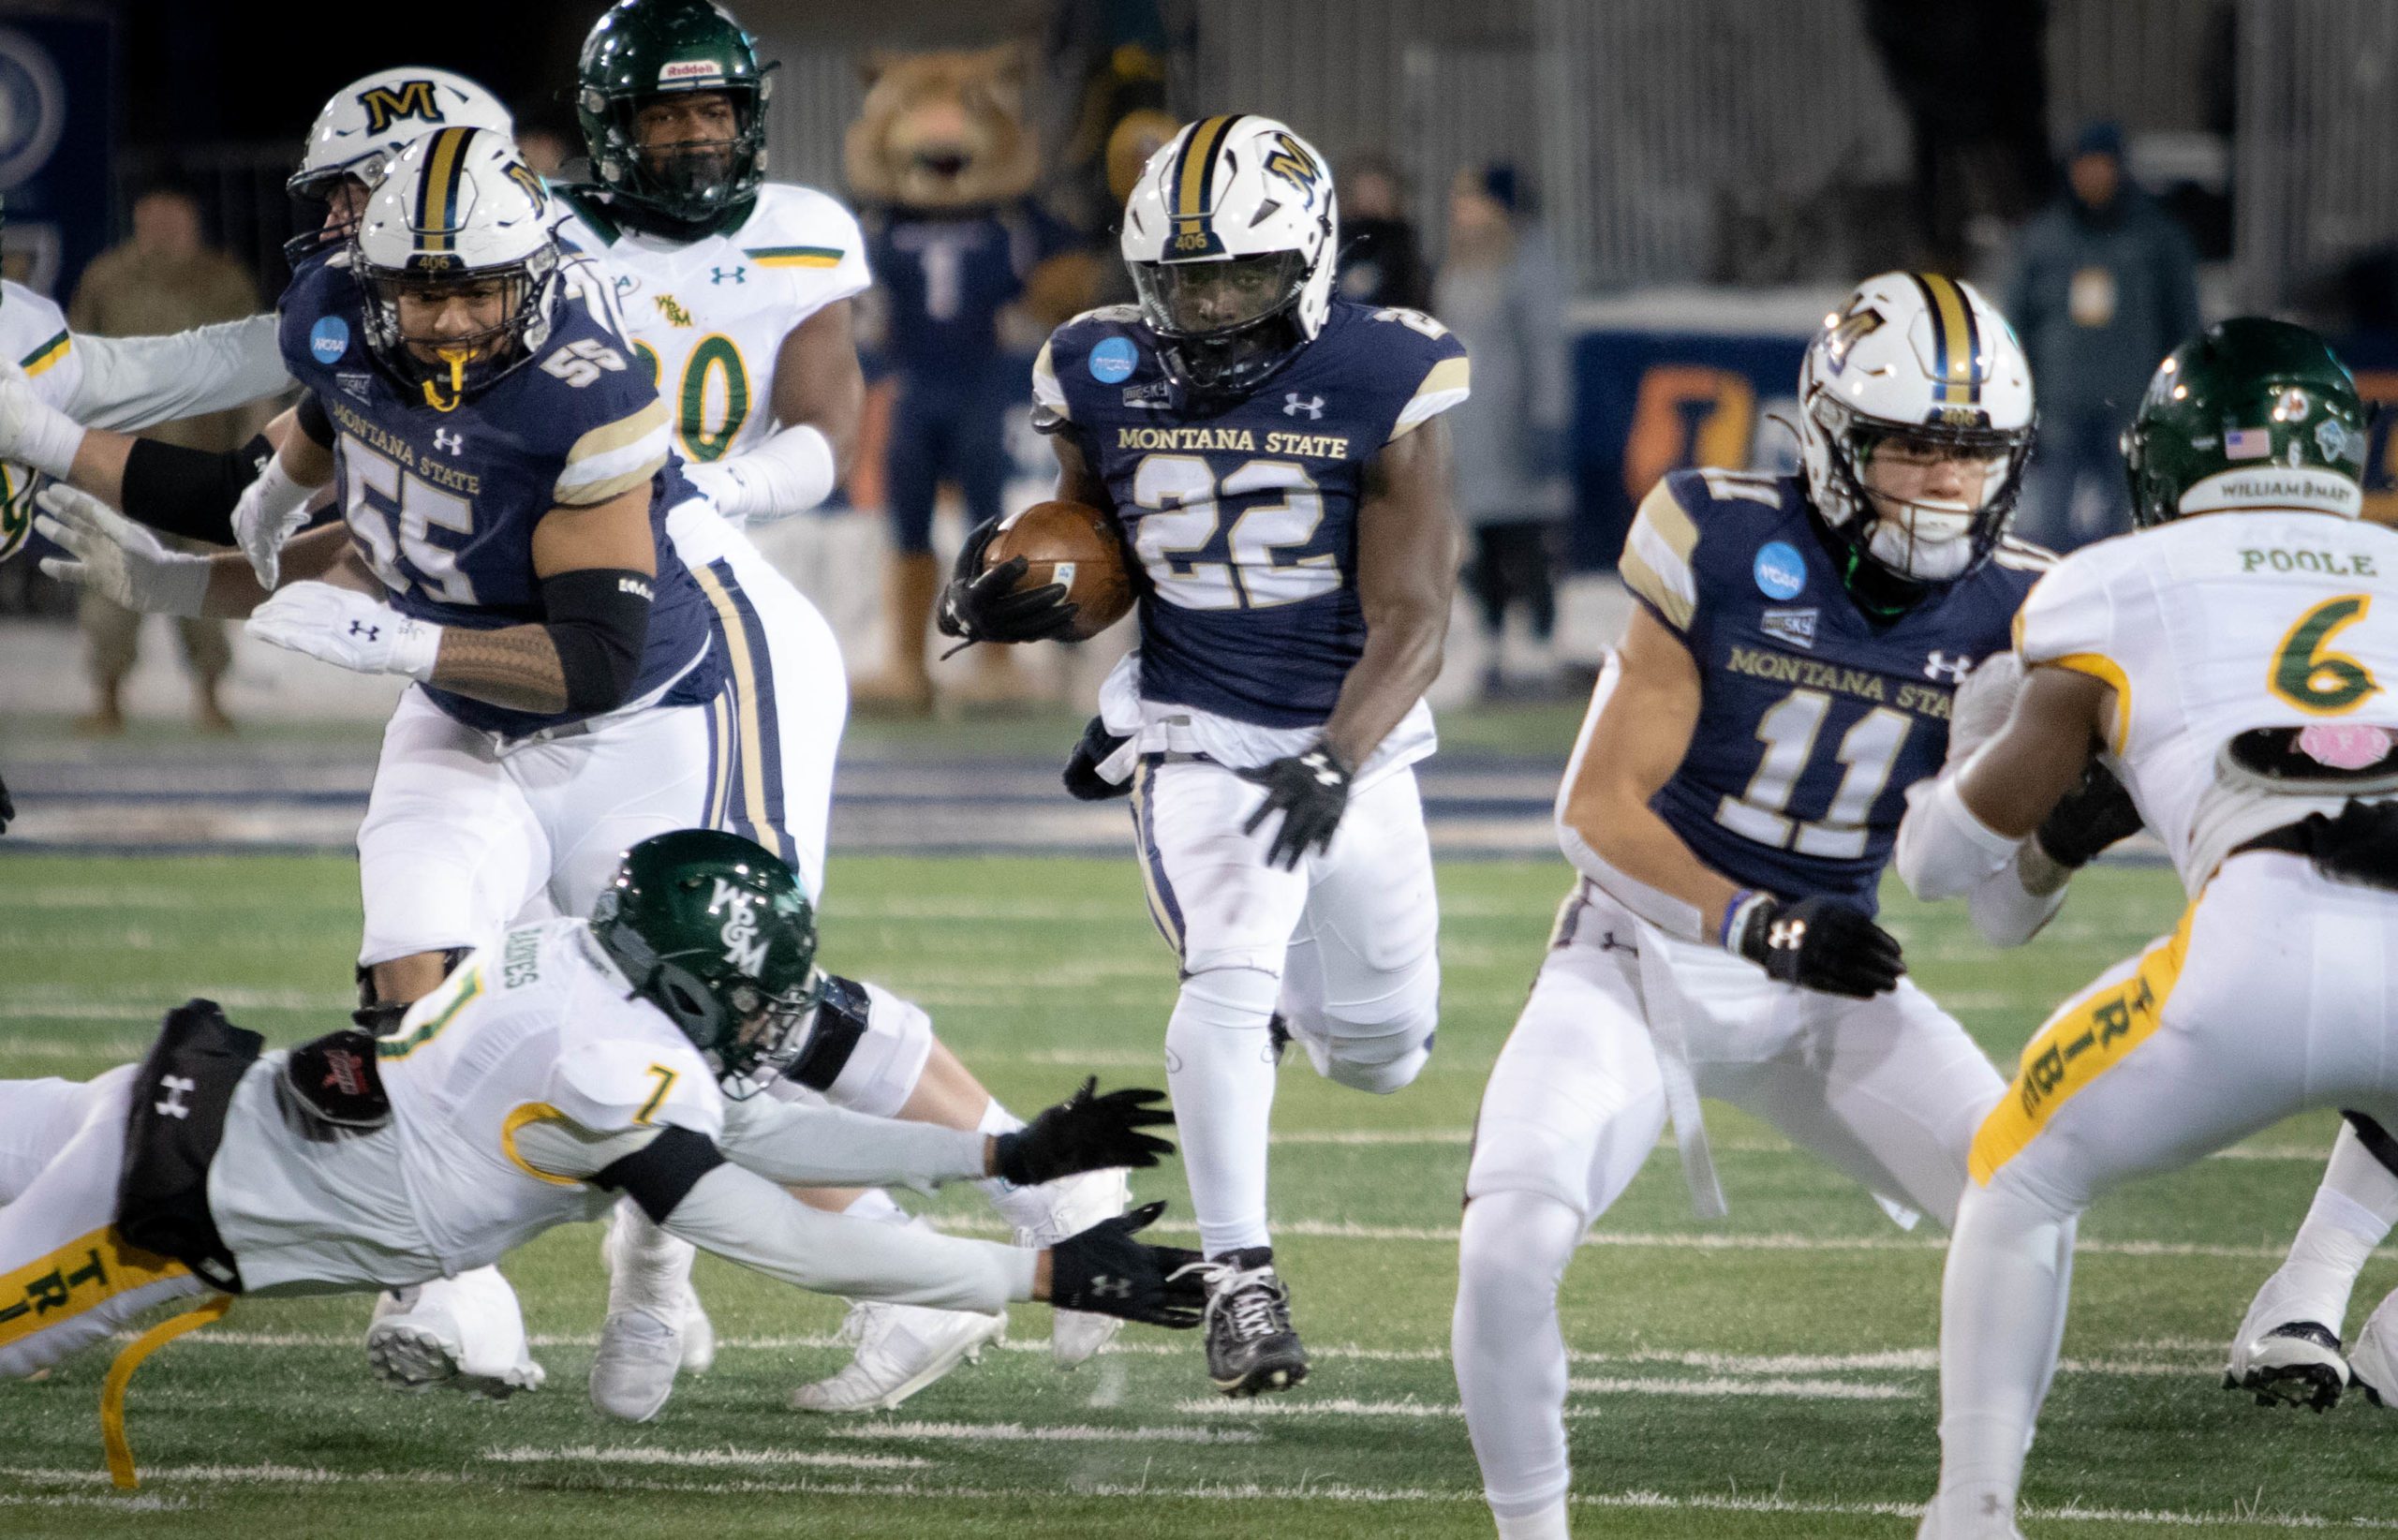 How to watch the Montana State Bobcats in the FCS semifinal Dec. 17